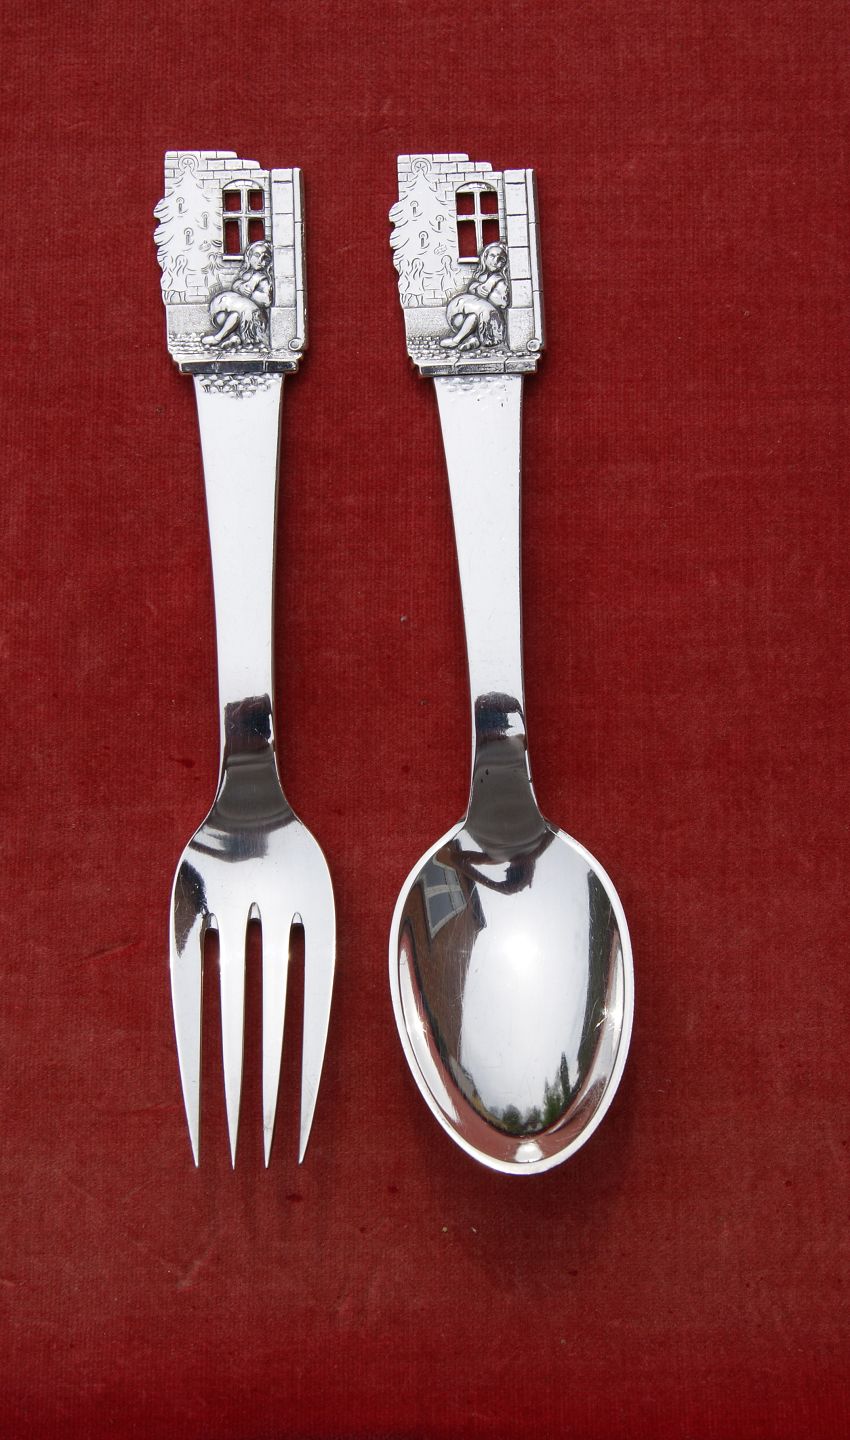 Fairy Theme - Kids Cutlery Fork and Spoon Set